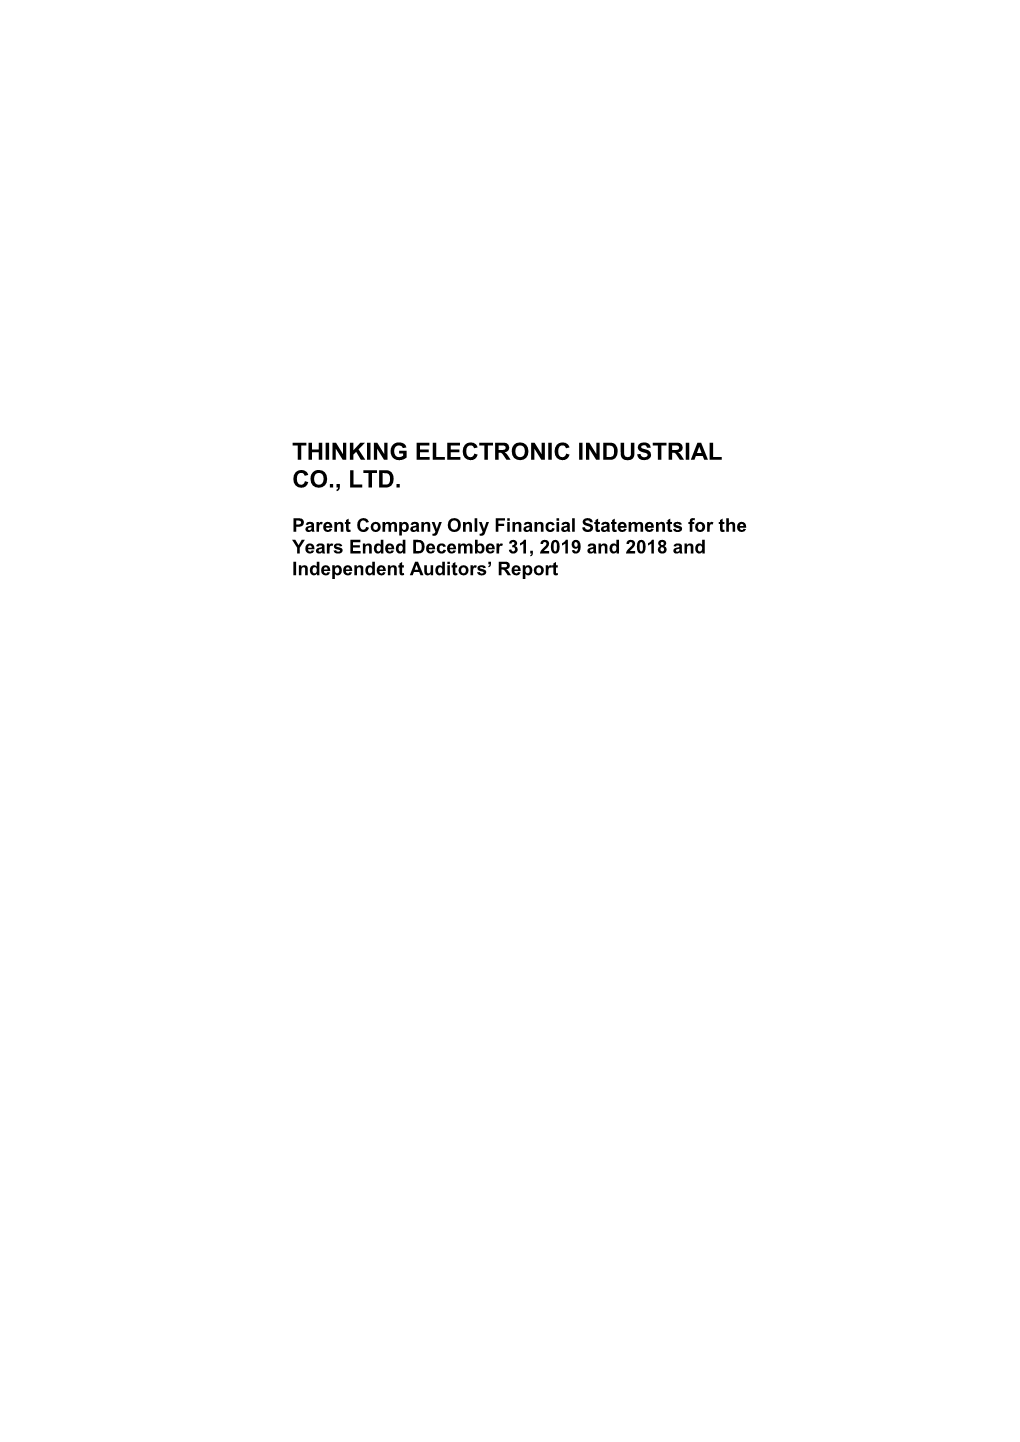 Thinking Electronic Industrial Co., Ltd